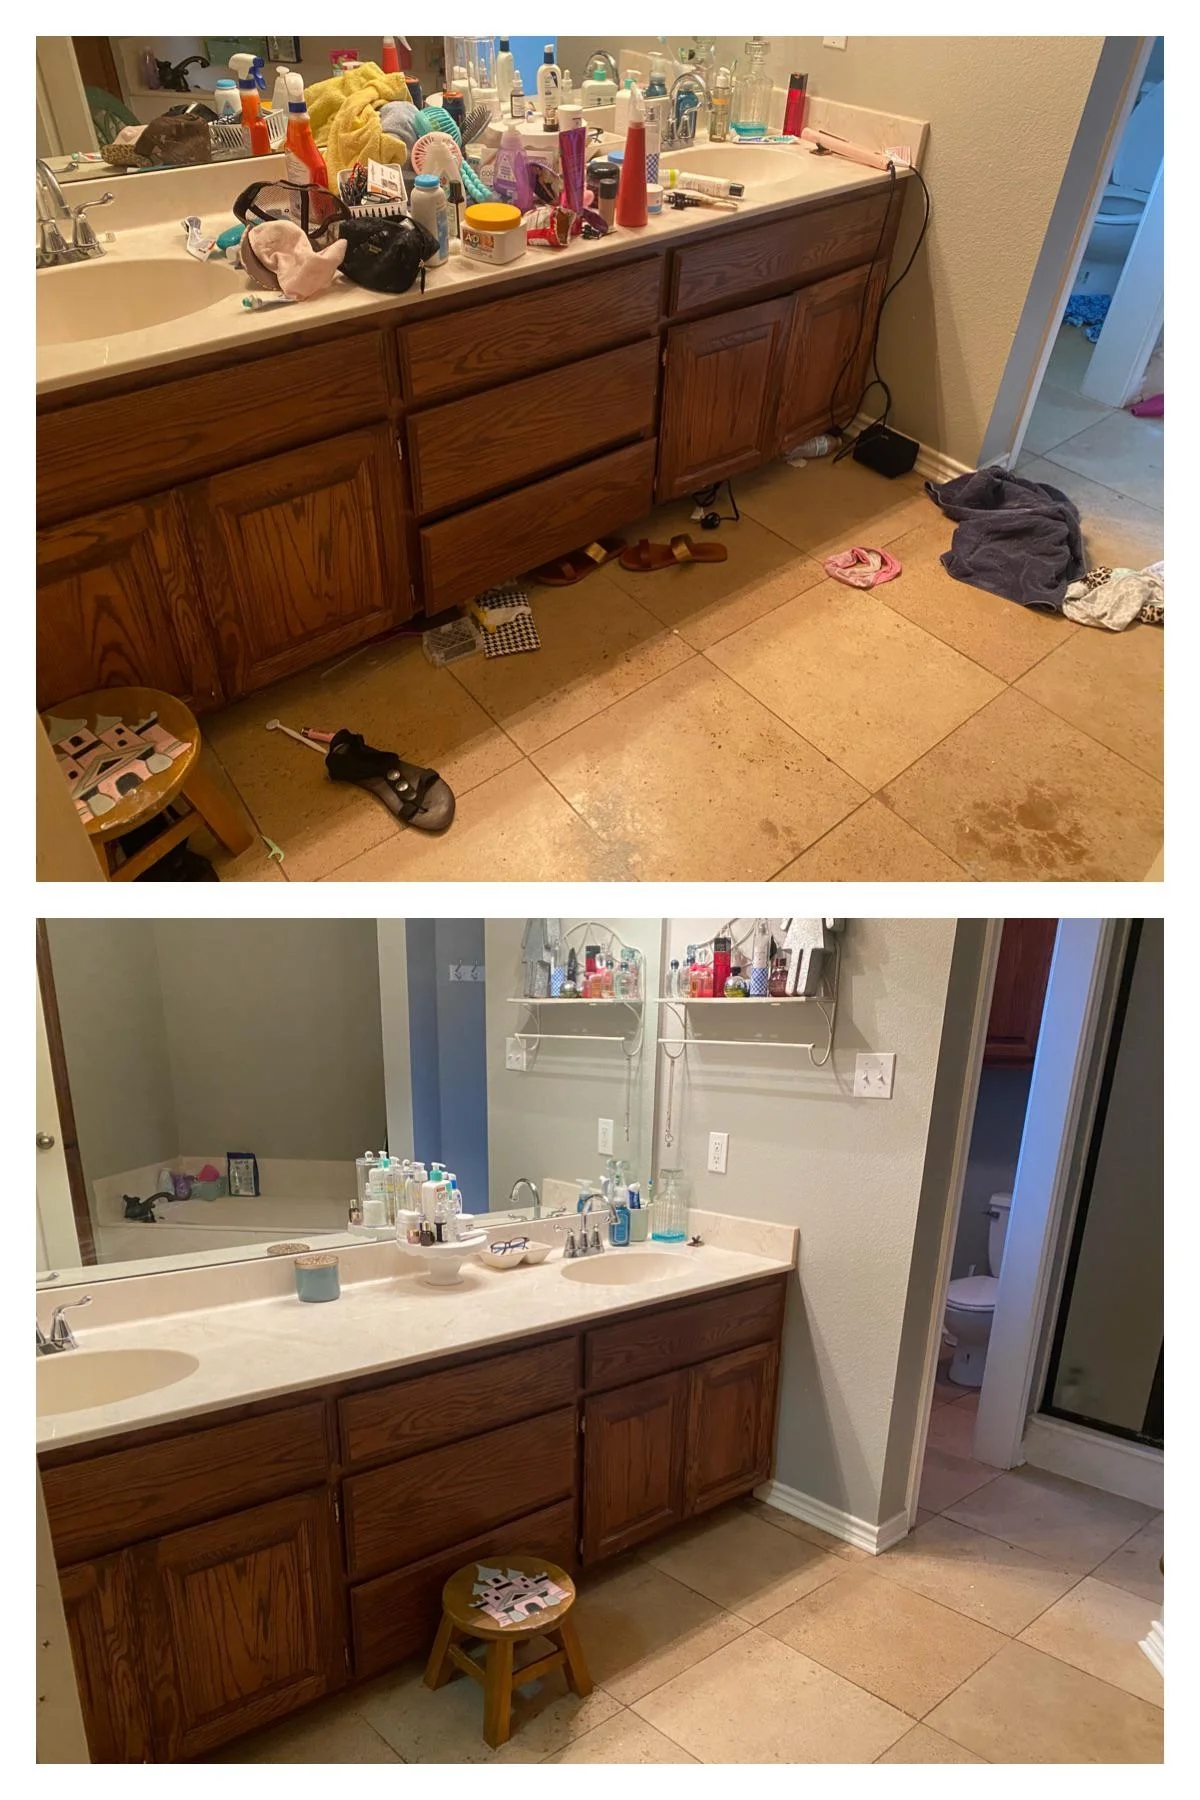 before and after pictures of a dirty and cluttered bathroom that has been cleaned and de-cluttered.